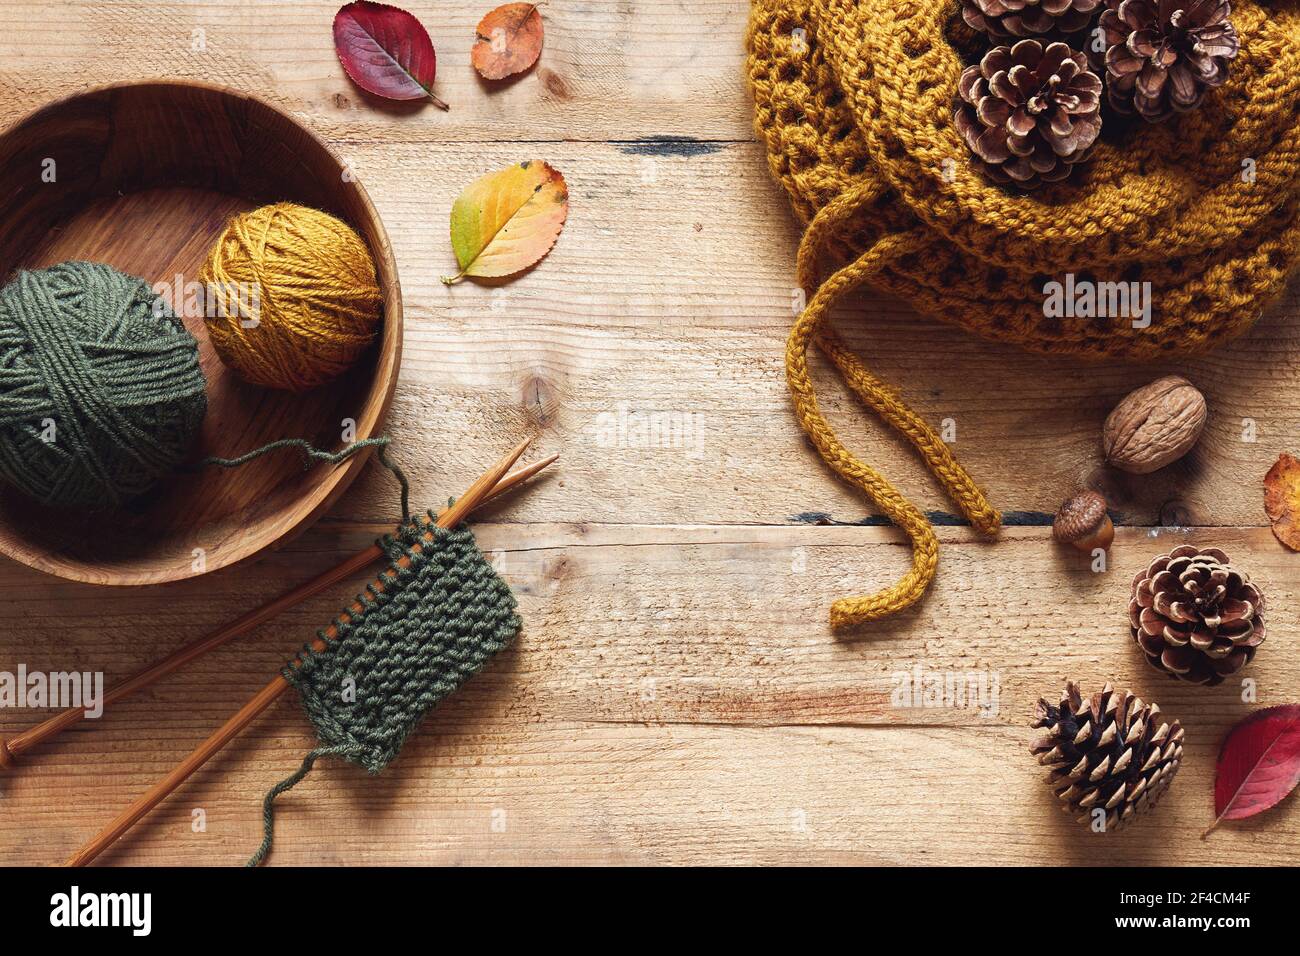 A piece of knitting with wooden needles and yarn among leaves and pine cones, autumn knitting. Stock Photo